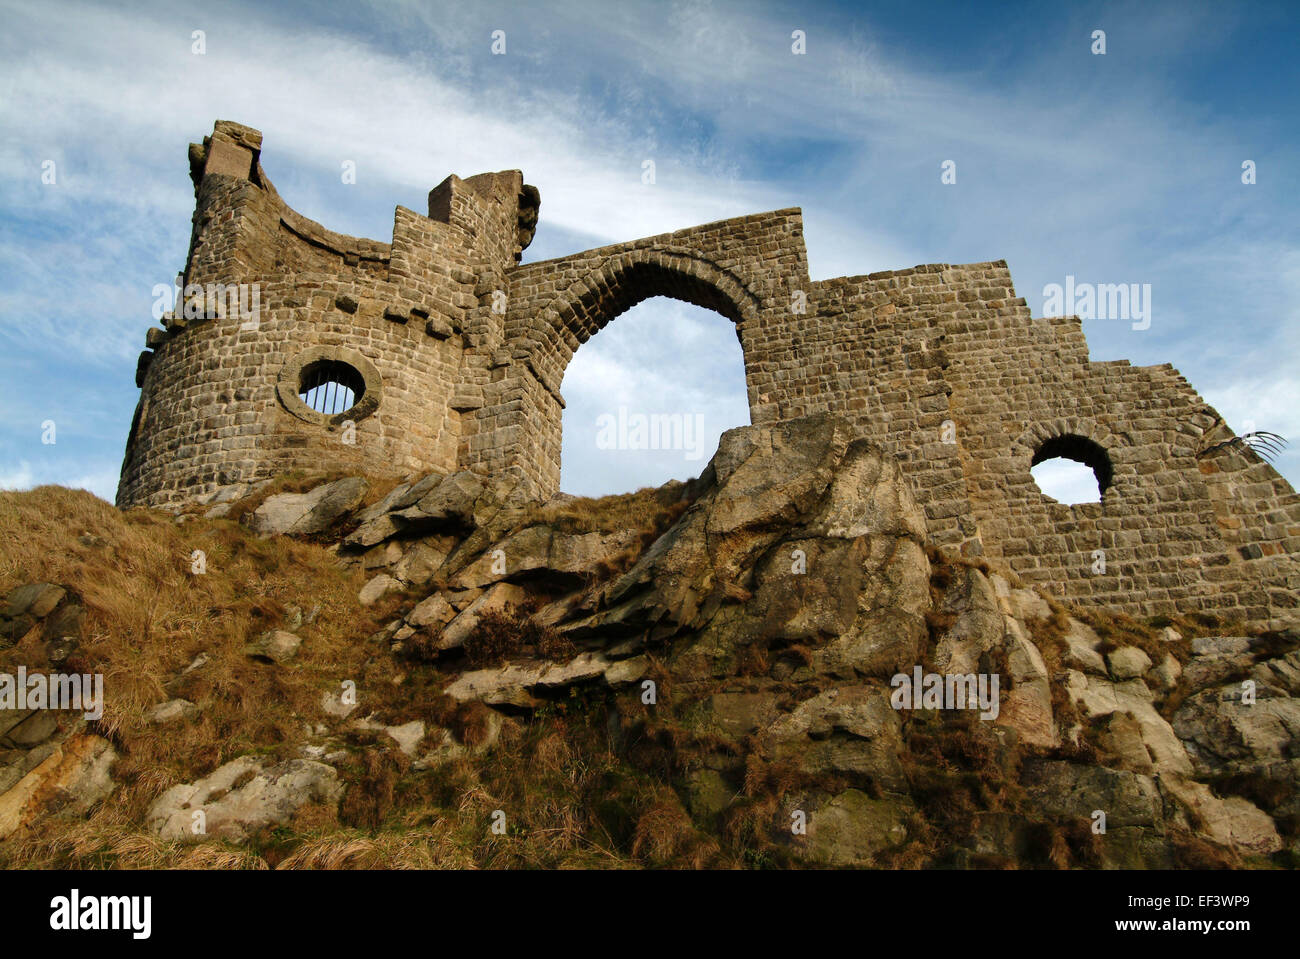 Mow Cop Castle in the village of Mow Cop, Staffordshire. Stock Photo